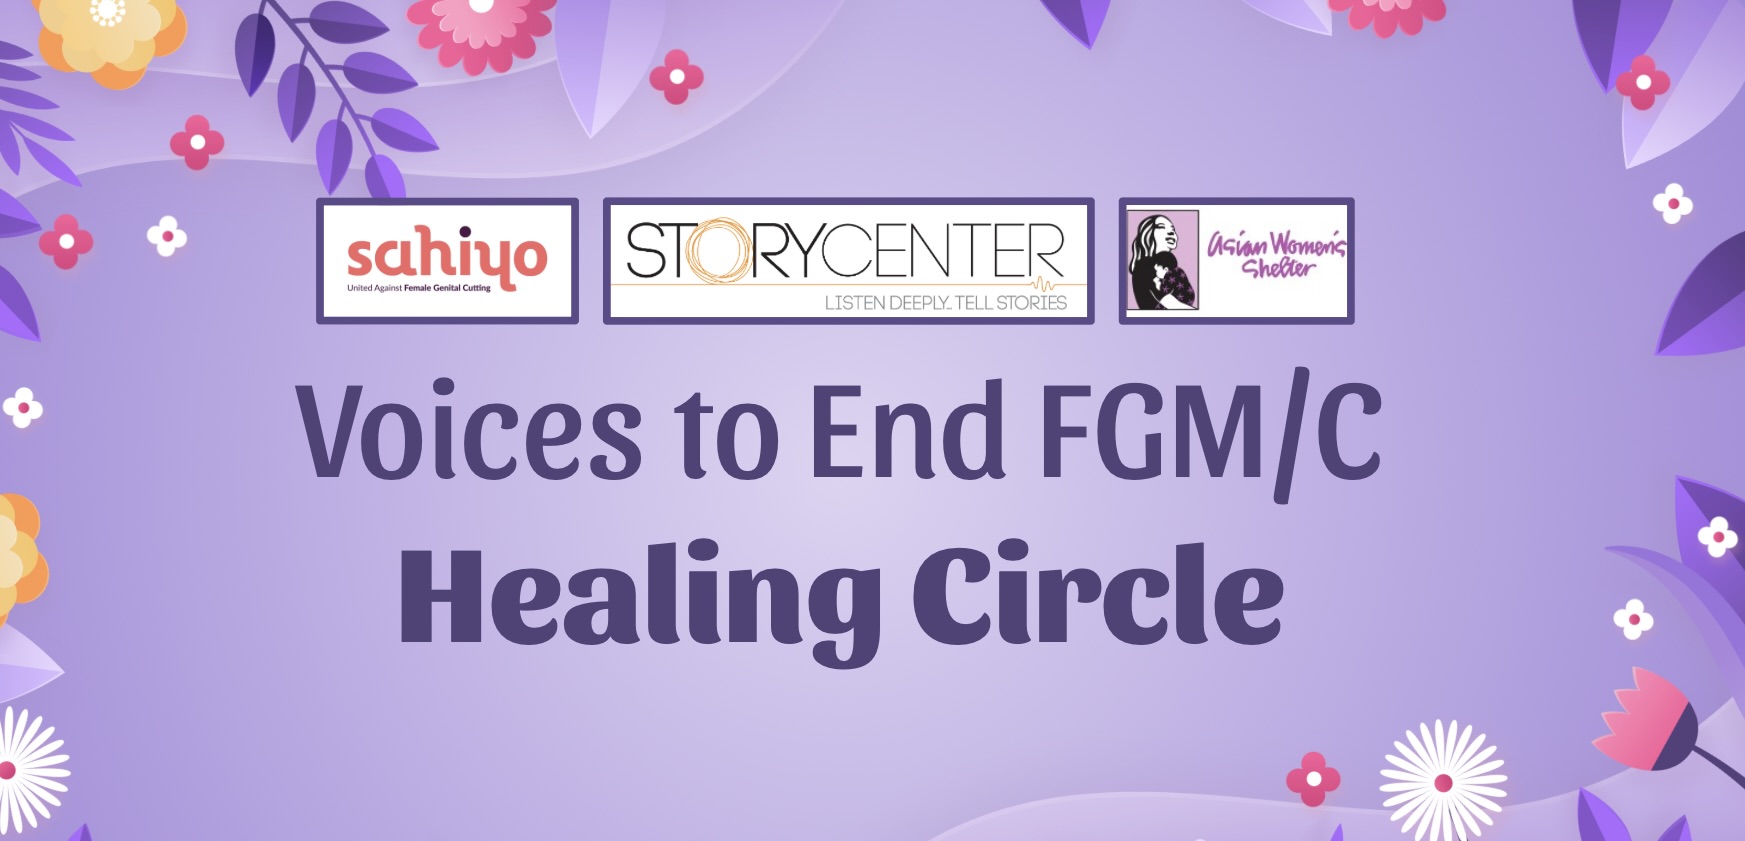 Sahiyo holds first Voices to End FGM/C Healing Circle